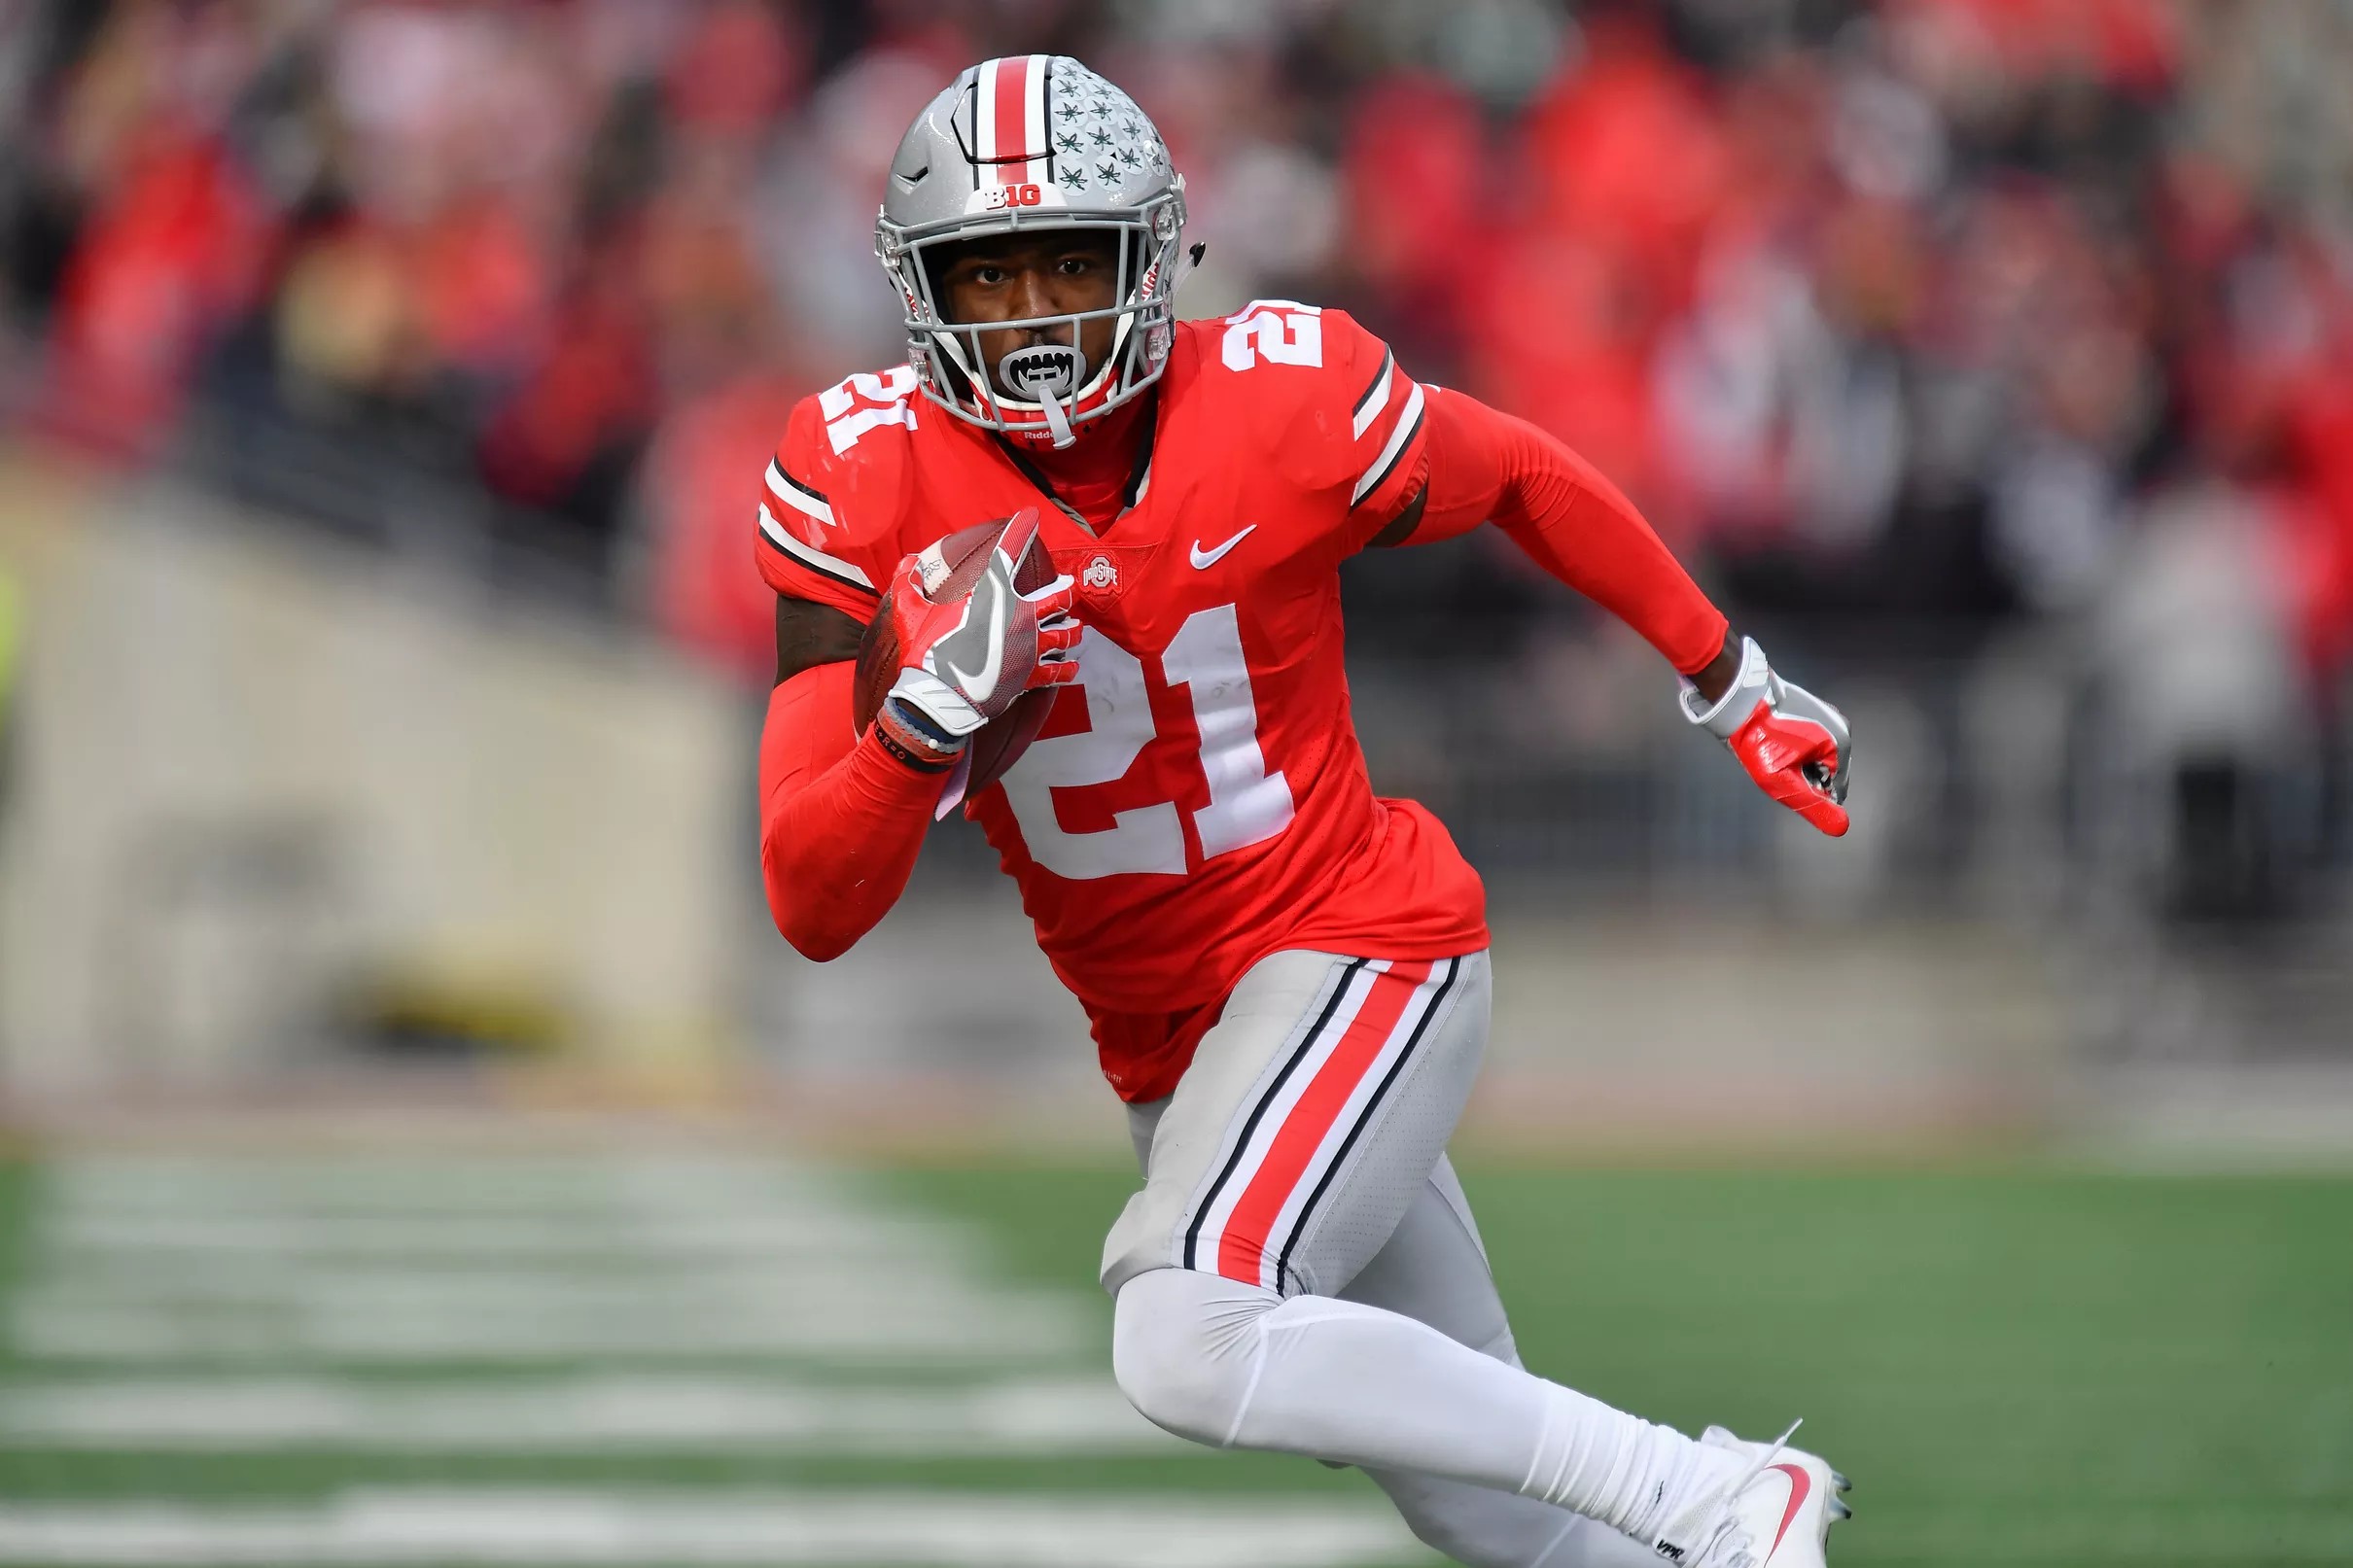 With several players returning in 2018, Ohio State won’t have many